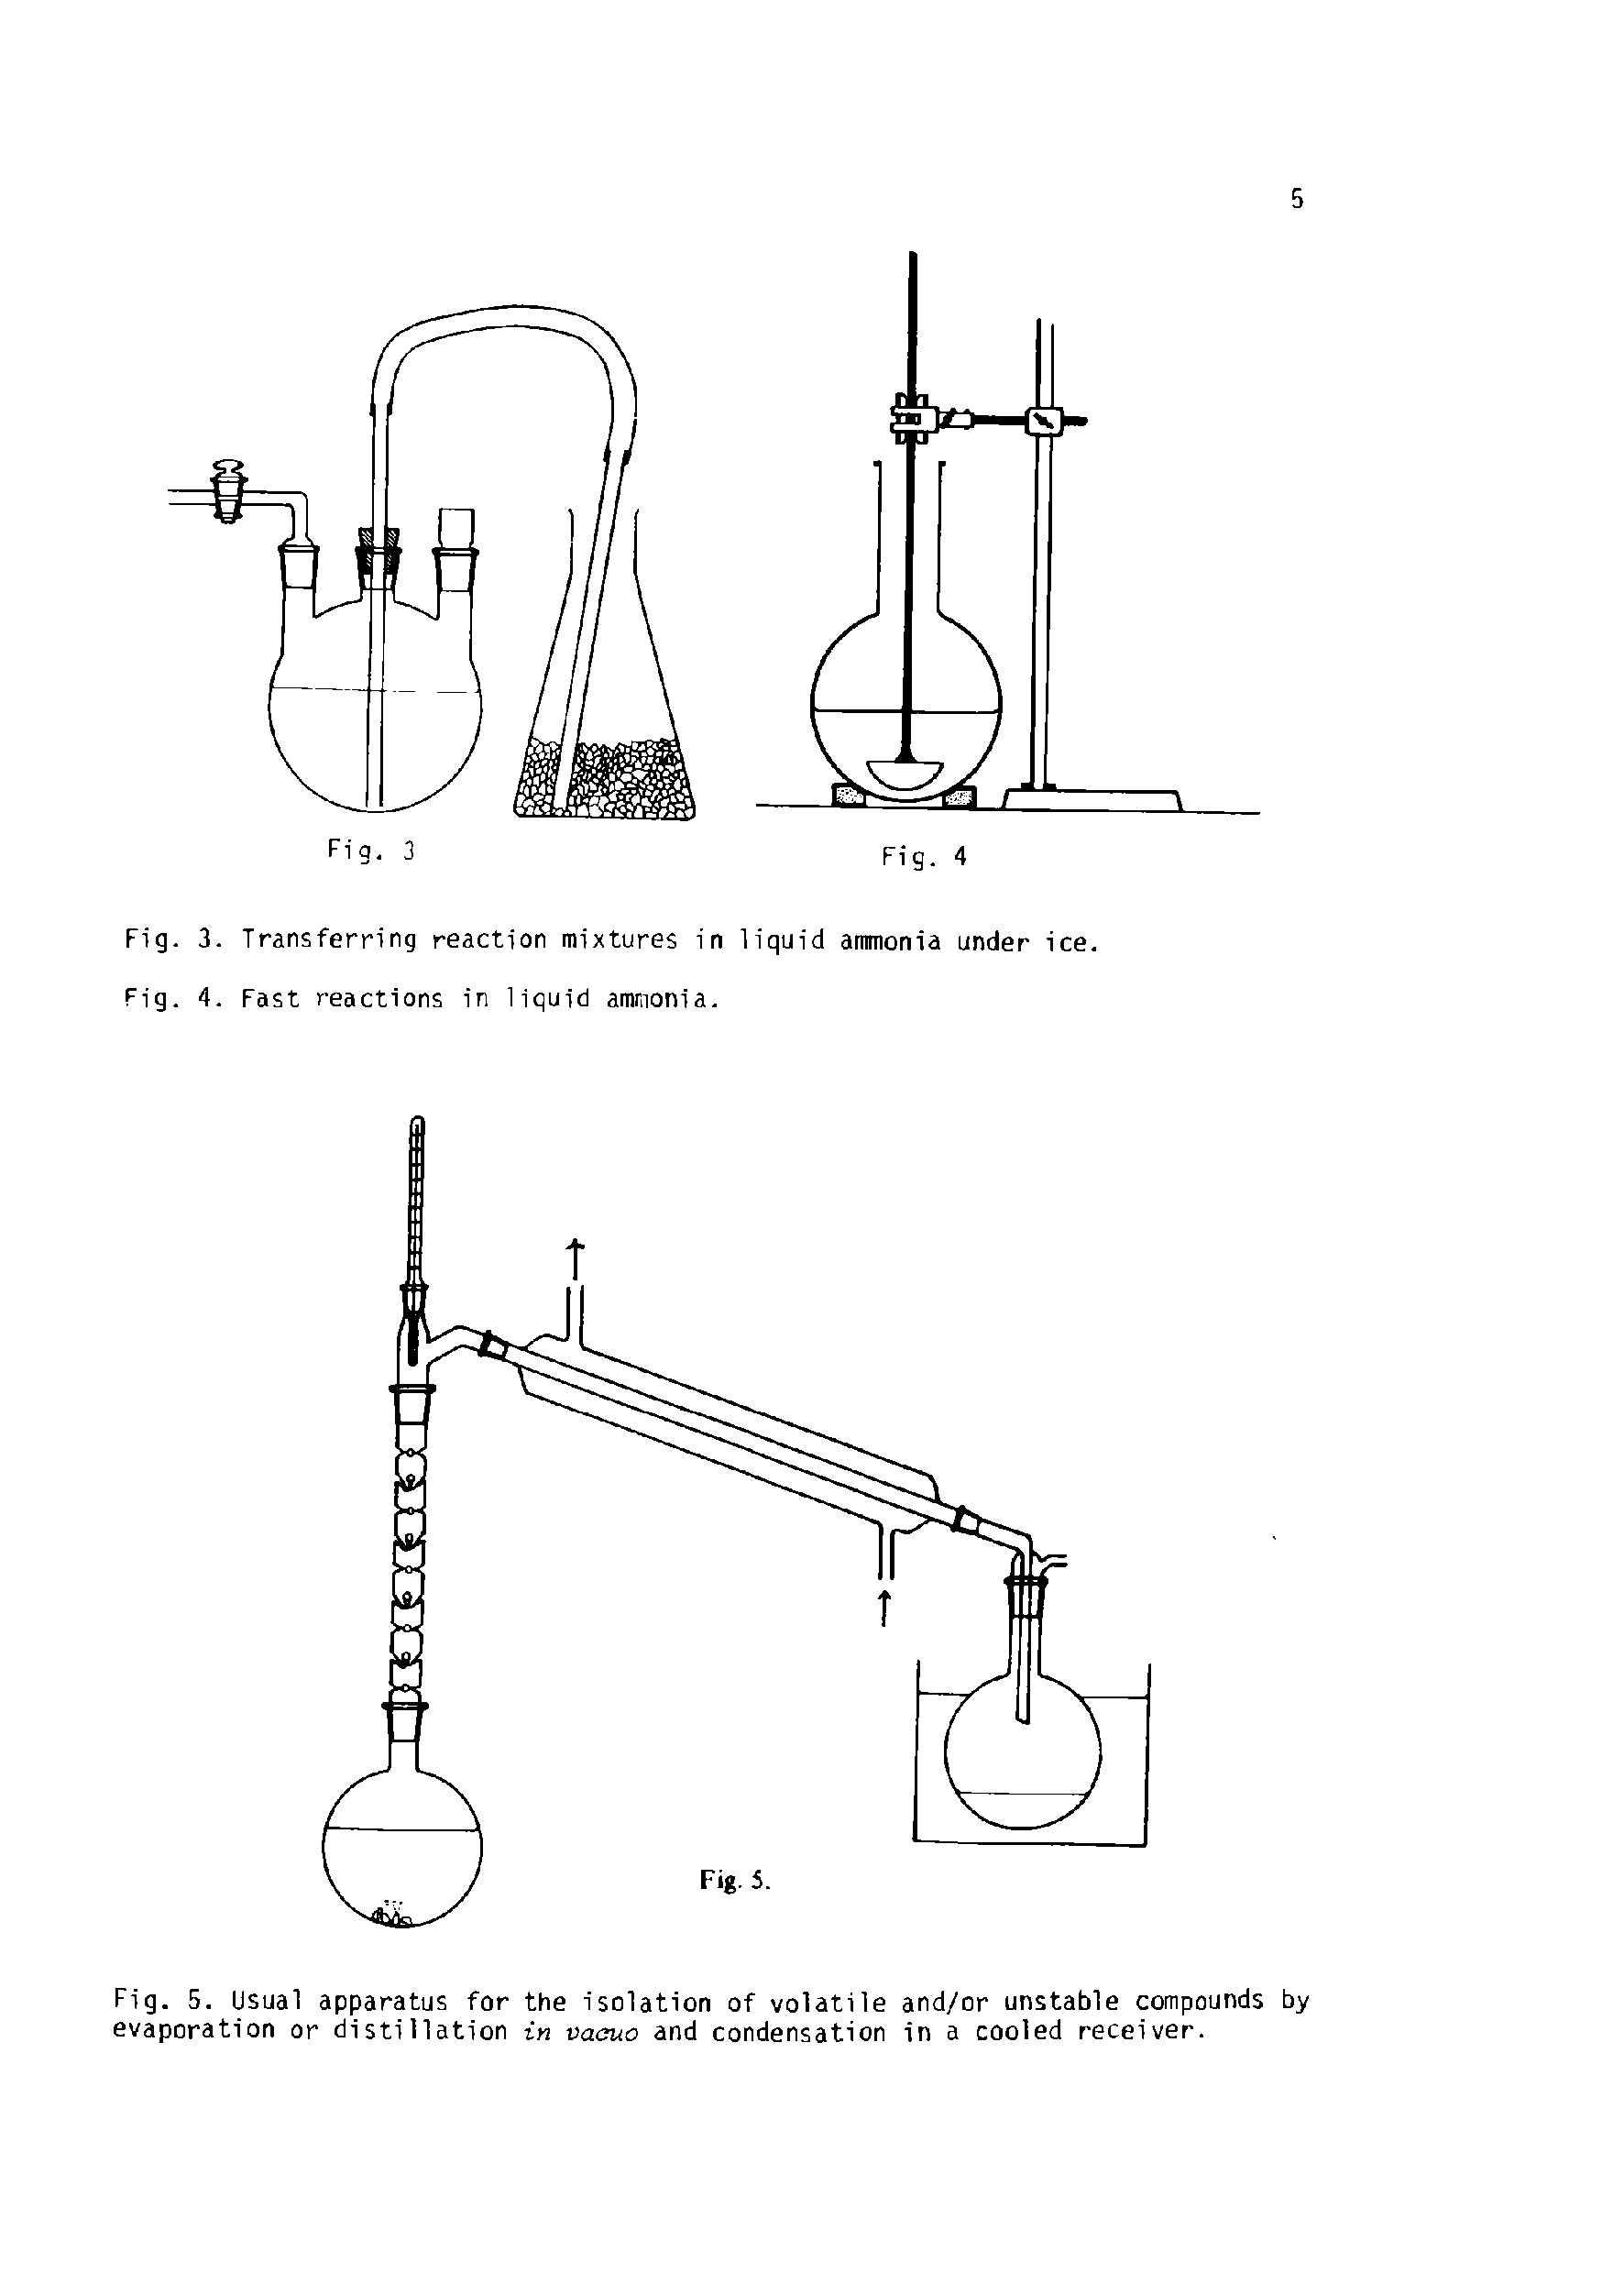 Fig. 5. Usual apparatus for the isolation of volatile and/or unstable compounds by evaporation or distillation in vacuo and condensation in a cooled receiver.